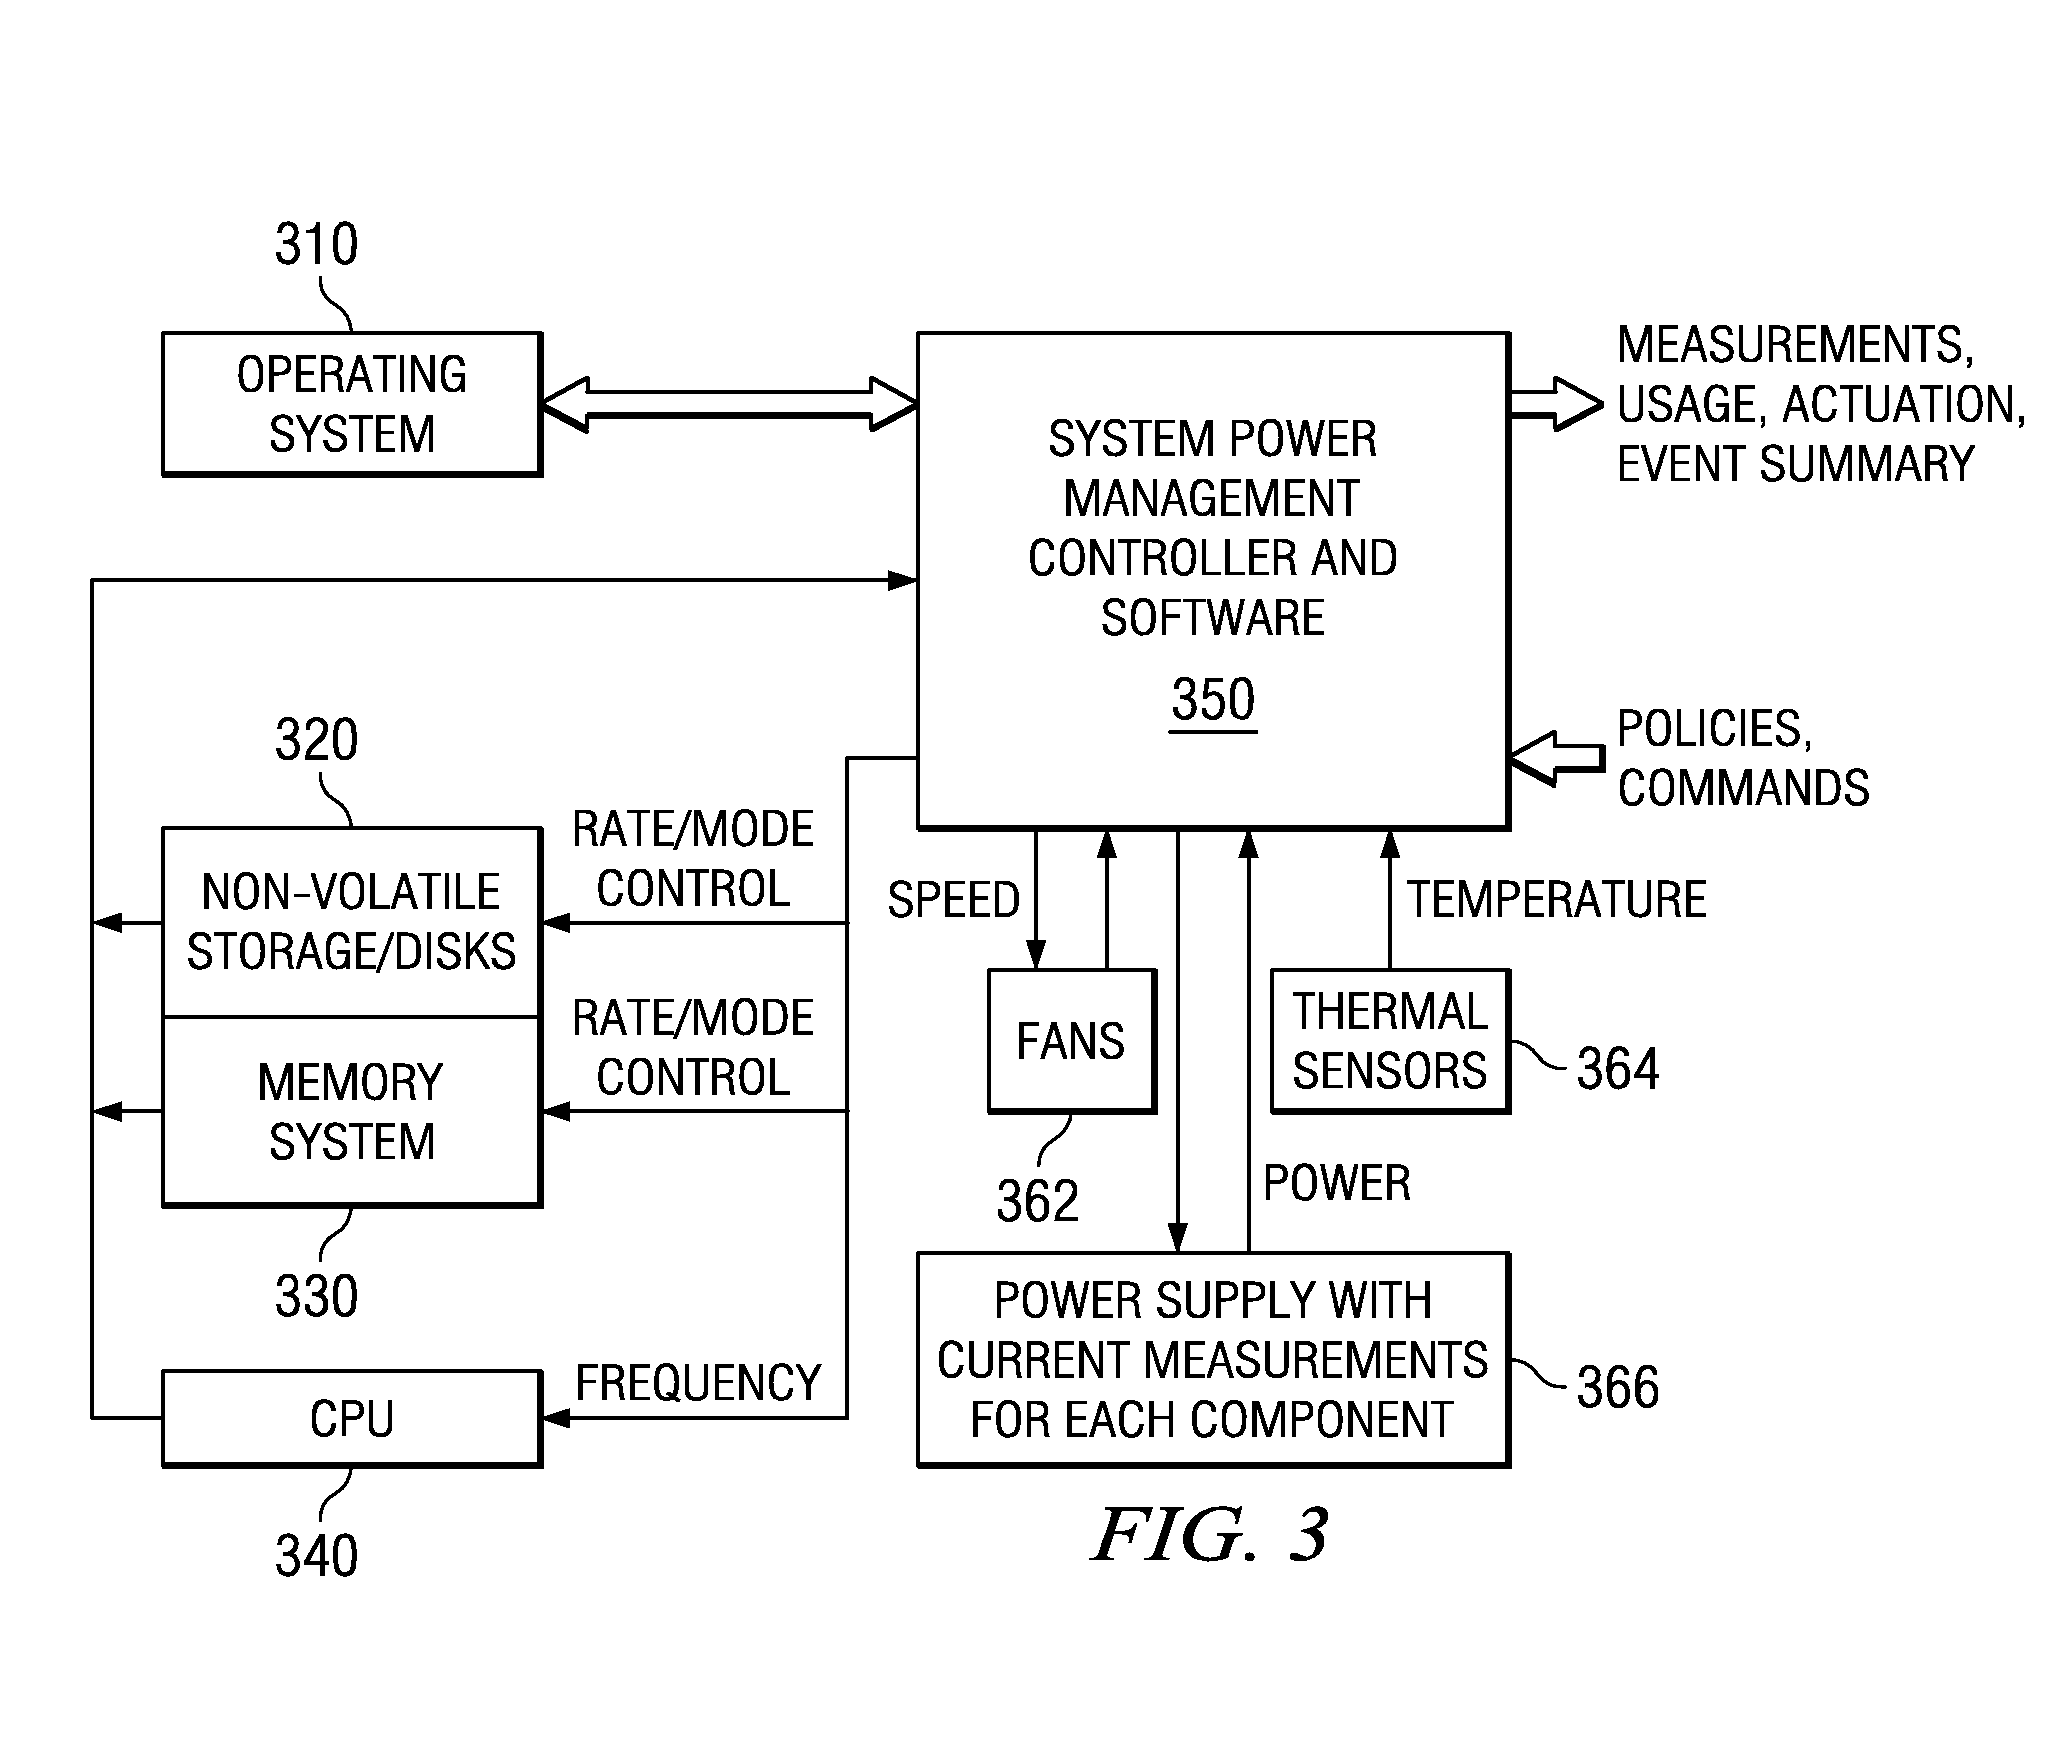 System for Unified Management of Power, Performance, and Thermals in Computer Systems